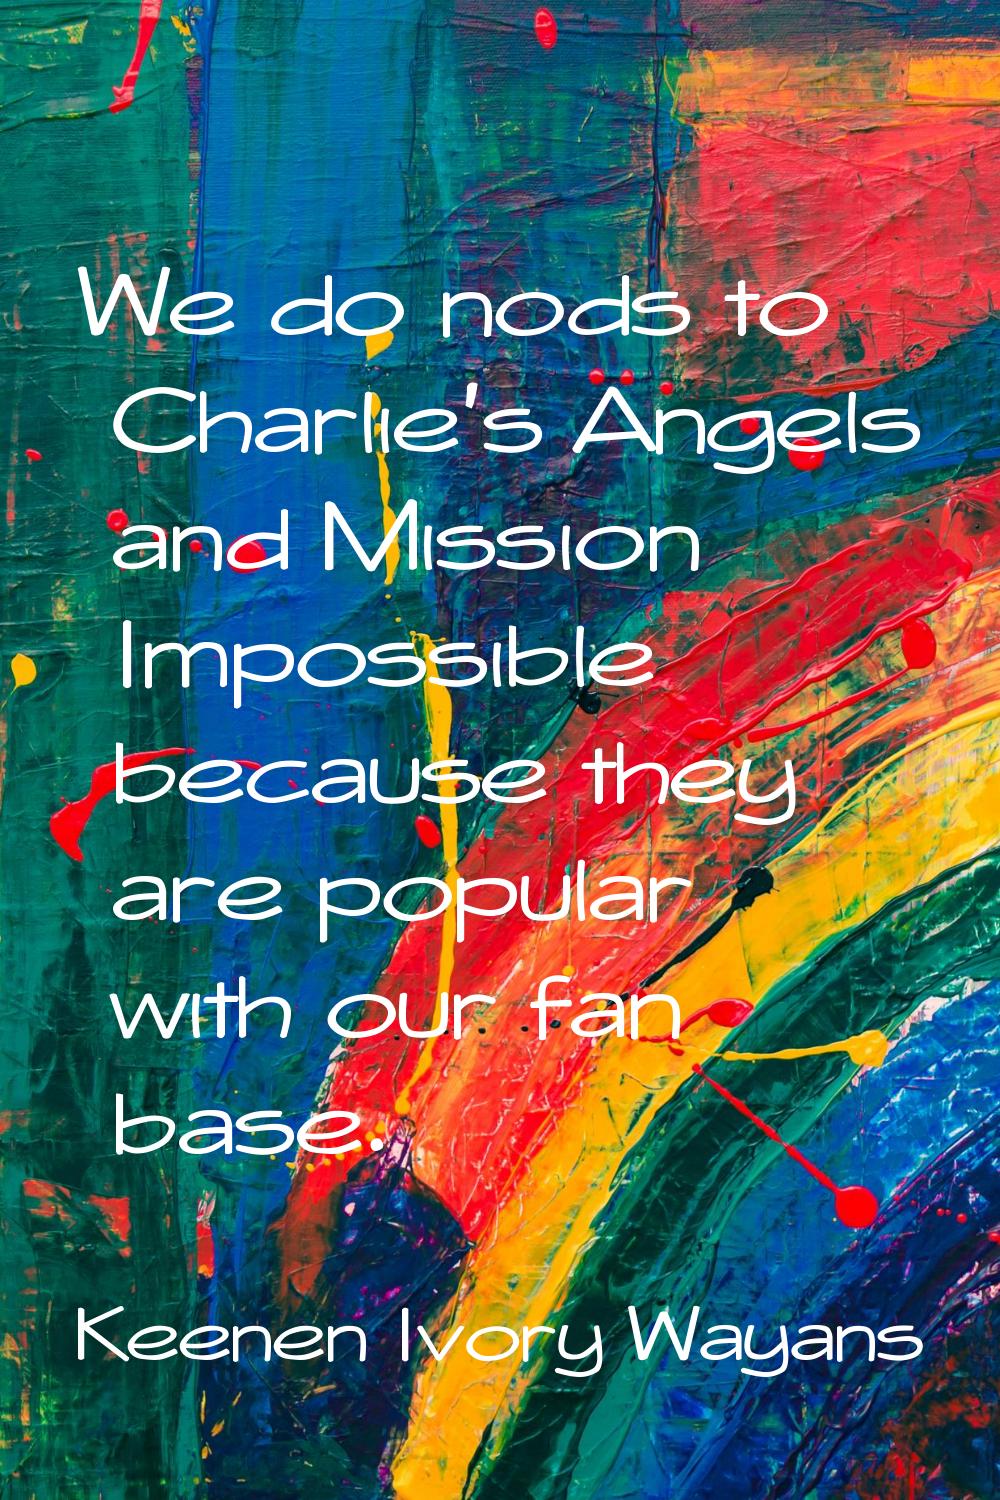 We do nods to Charlie's Angels and Mission Impossible because they are popular with our fan base.